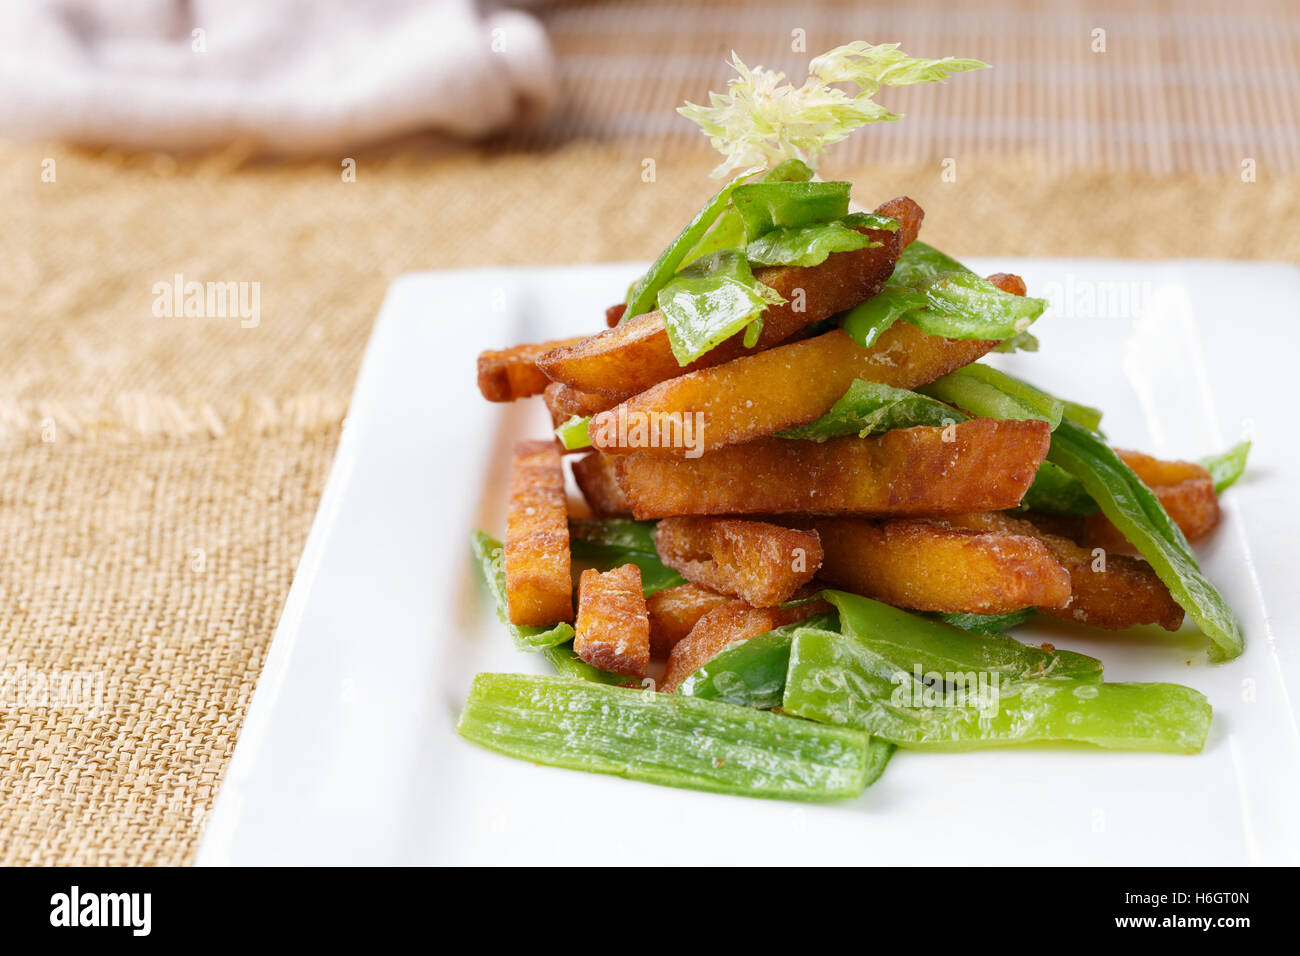 Vegetable dish, Chinese cooking Stock Photo